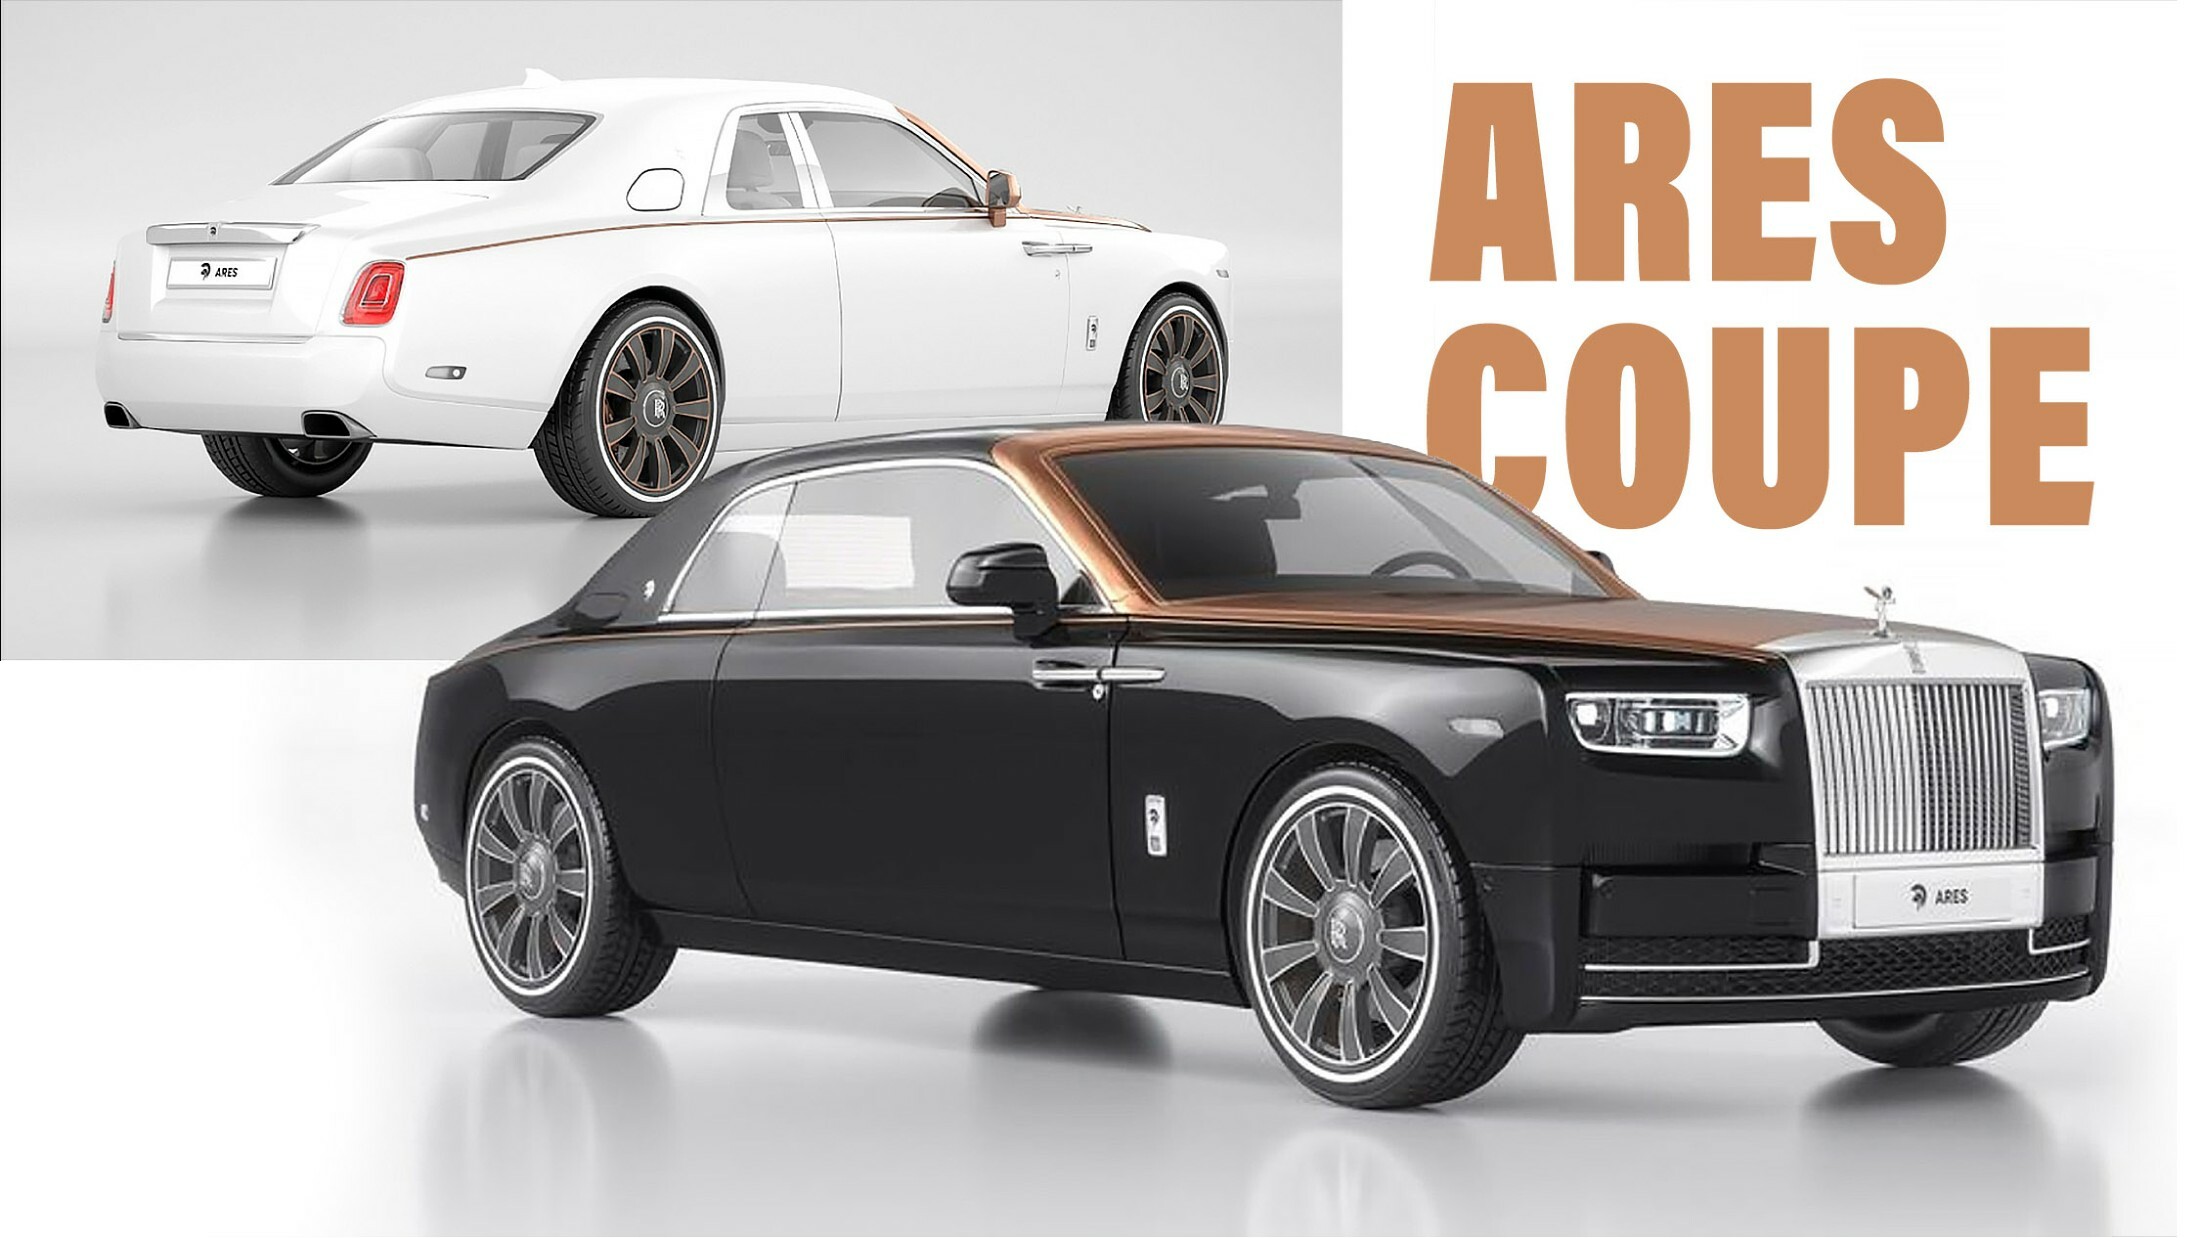 Rolls Royce has built the world's most expensive new car - The $29